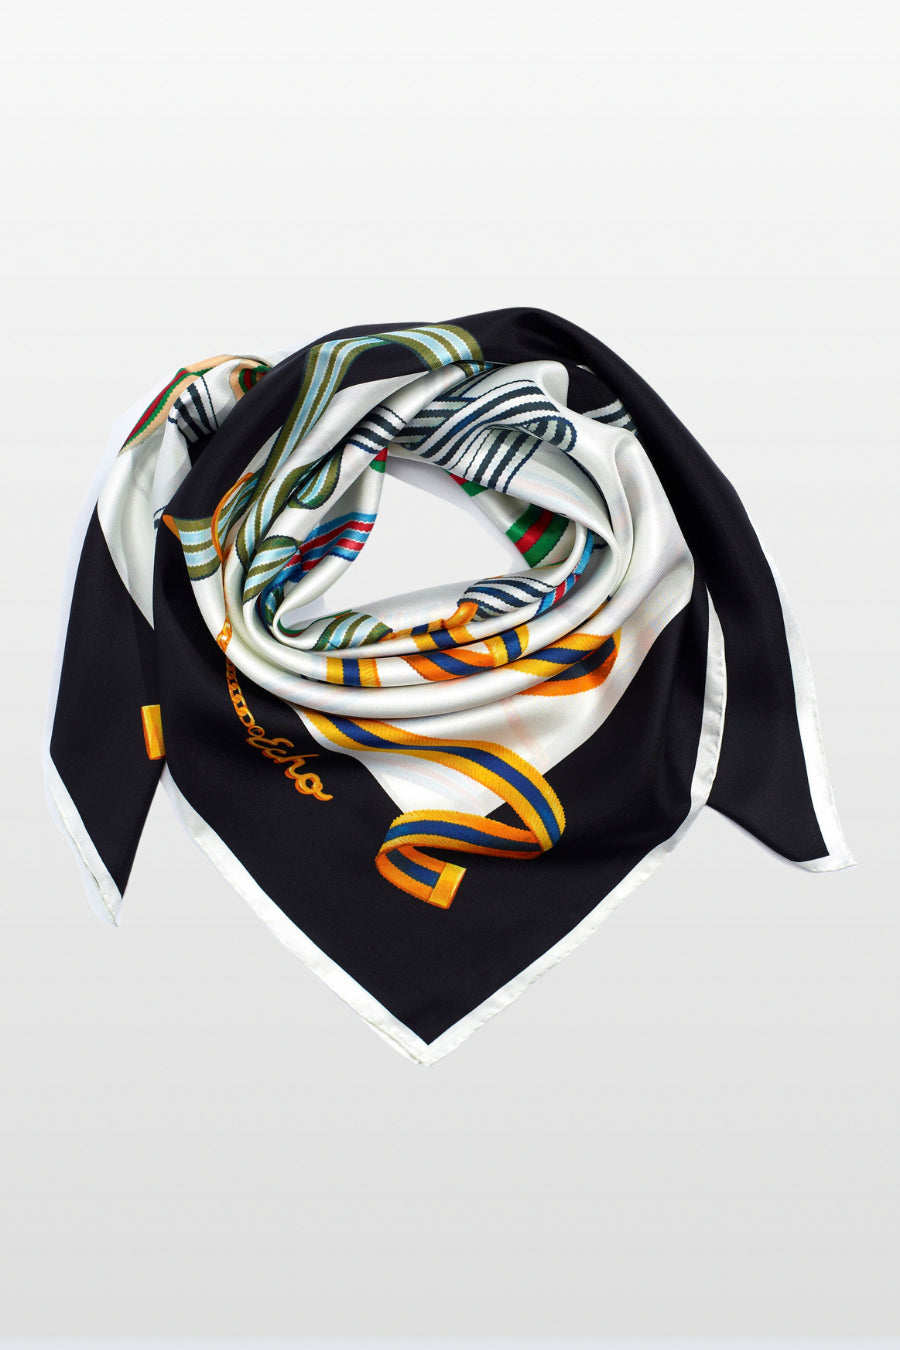 Web Of Intrigue 35" Silk Square Scarf